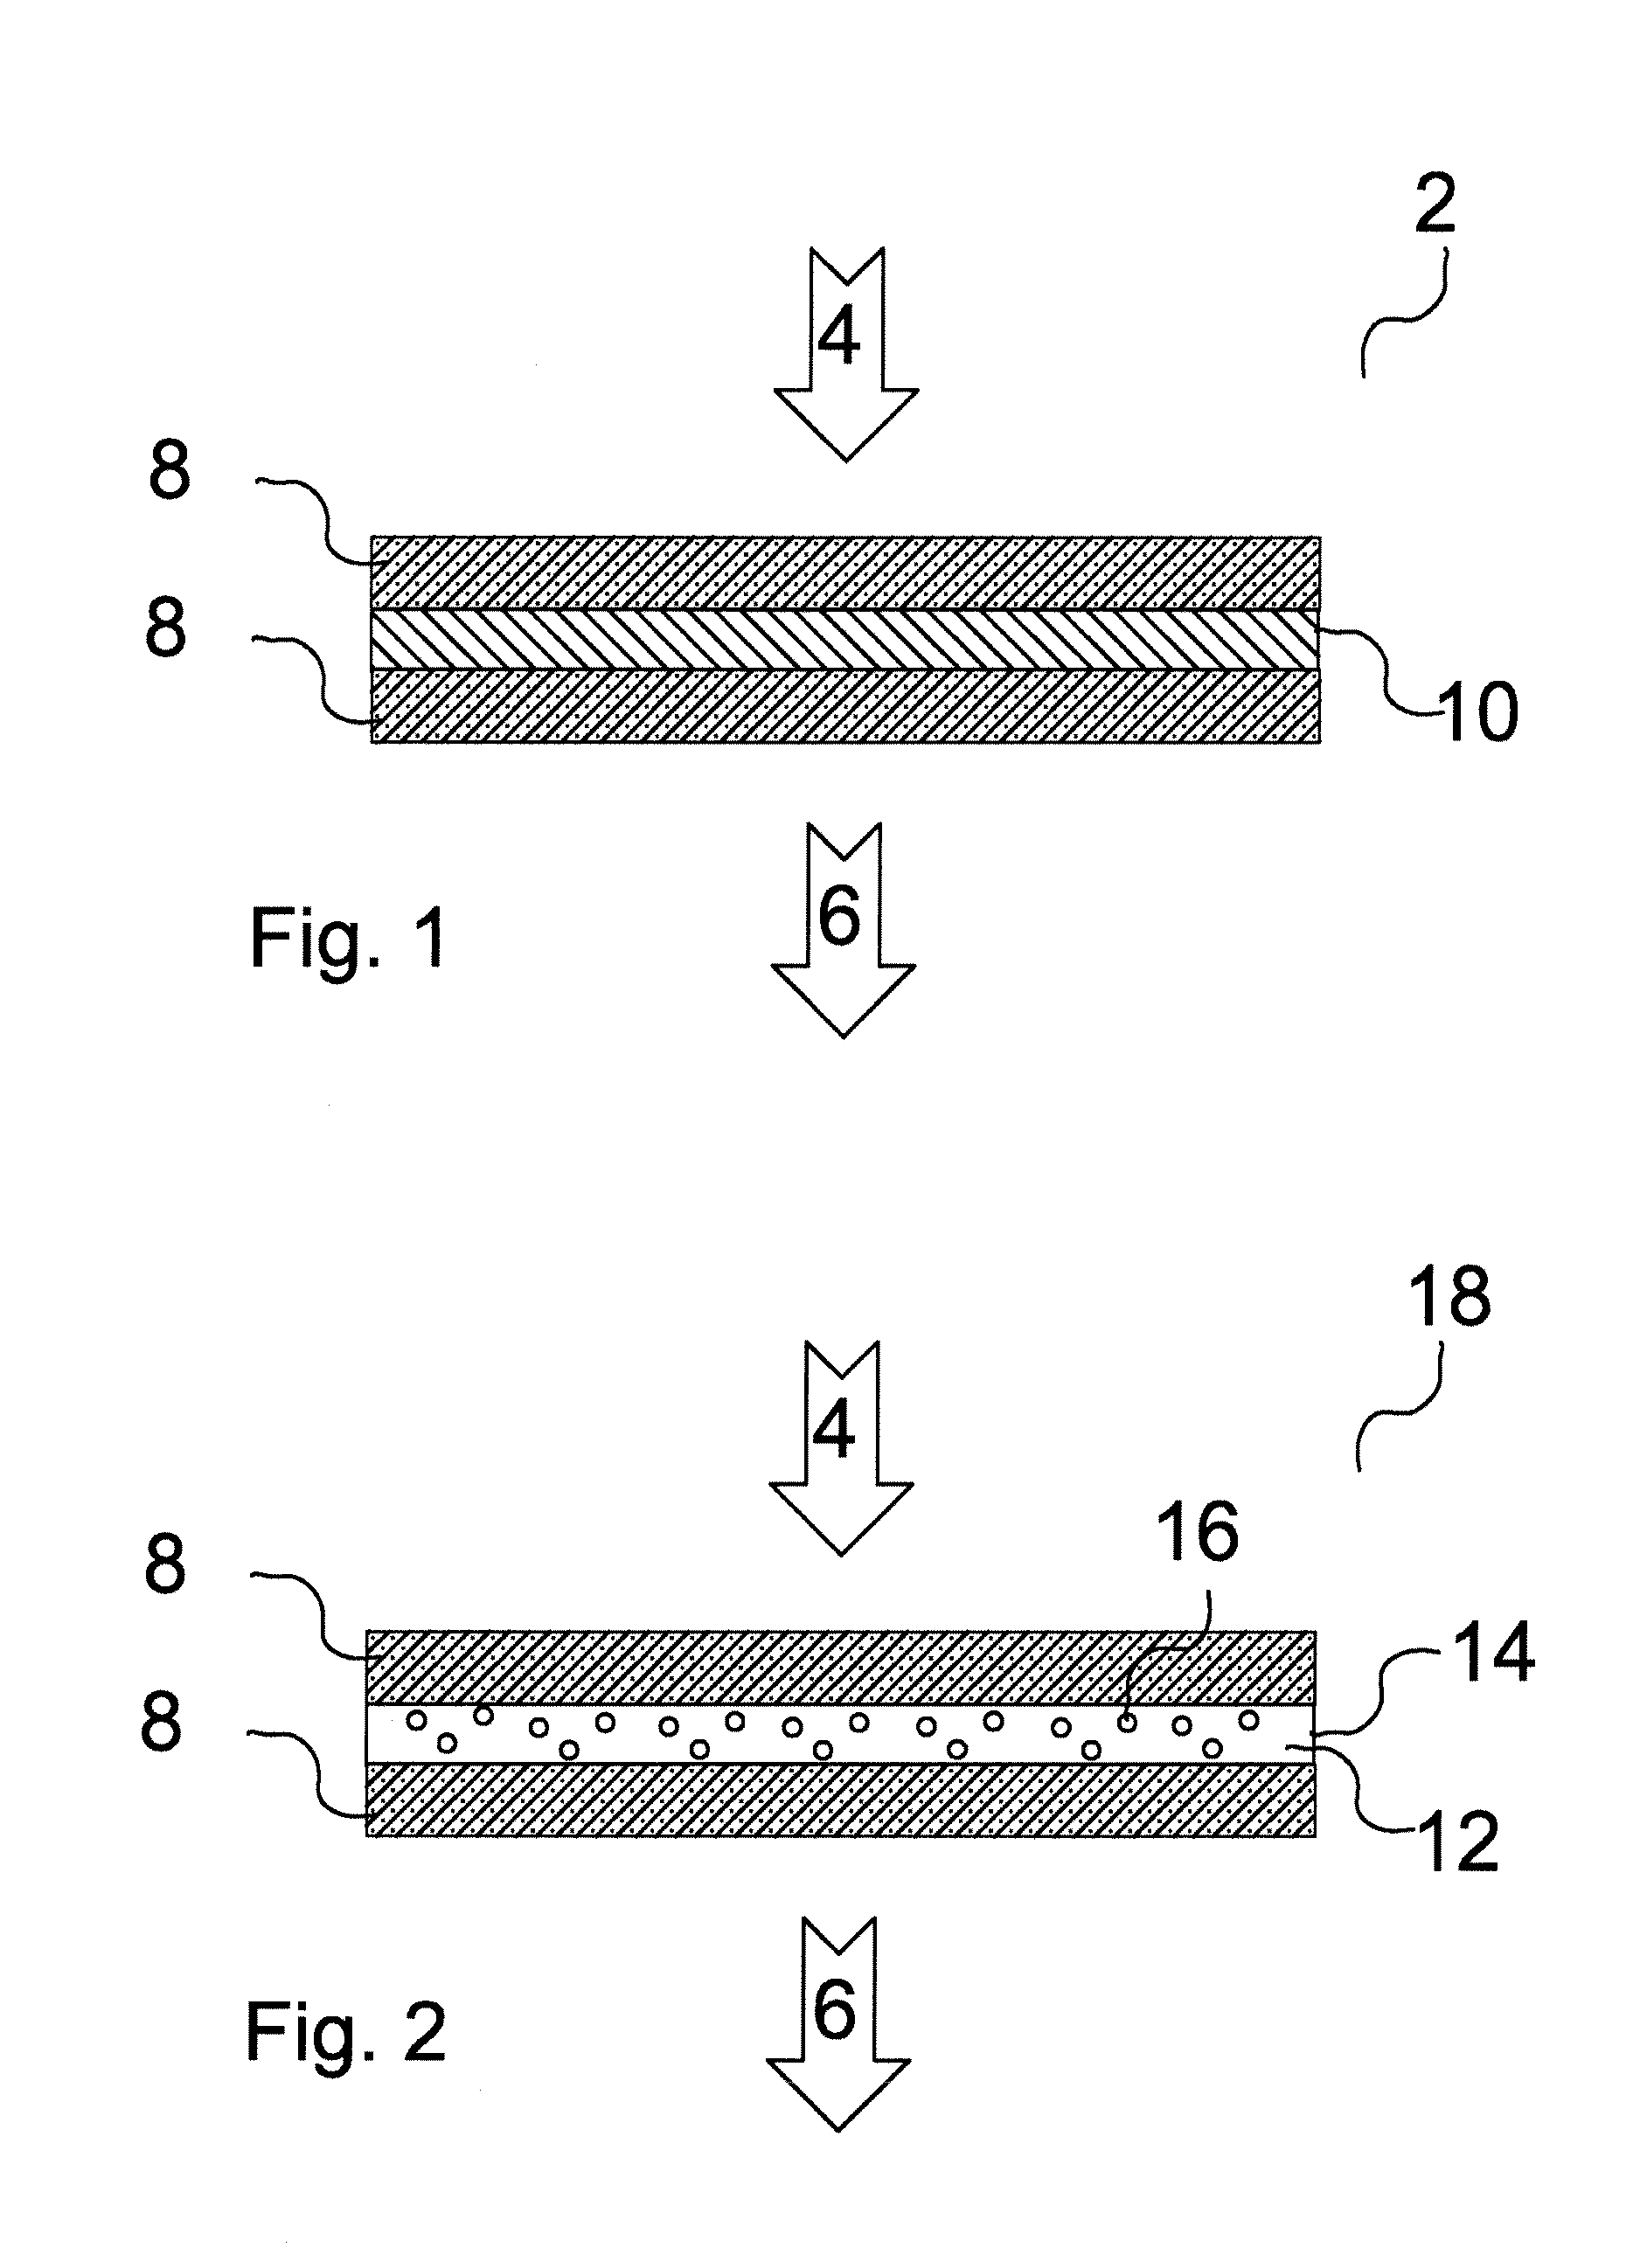 Responsivity Enhancement of Solar Light Compositions and Devices for Thermochromic Windows